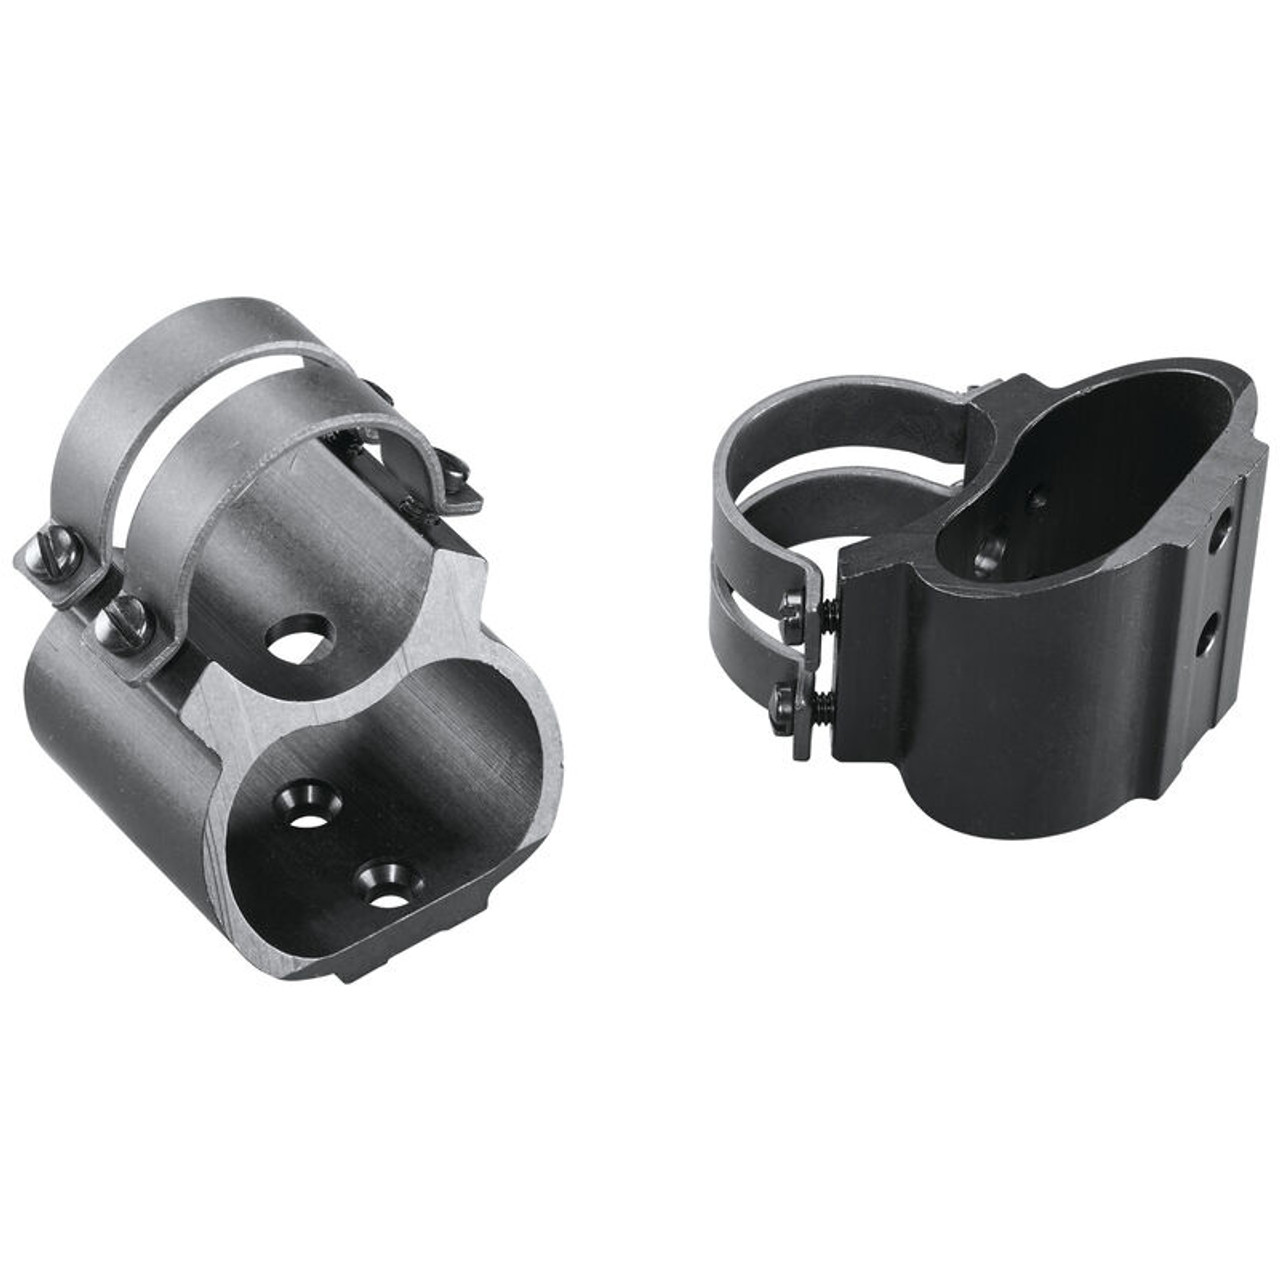 These SEE-THRU rings are made to mount to specific firearm receivers to enhance fit and performance. No bases are needed when using these rings. Mounts have steel straps for added strength.

Crafted expressly for specific firearm models
Lower ring and base are one piece
Steel-strap top design for increased hold
Fits Marlin Model 336